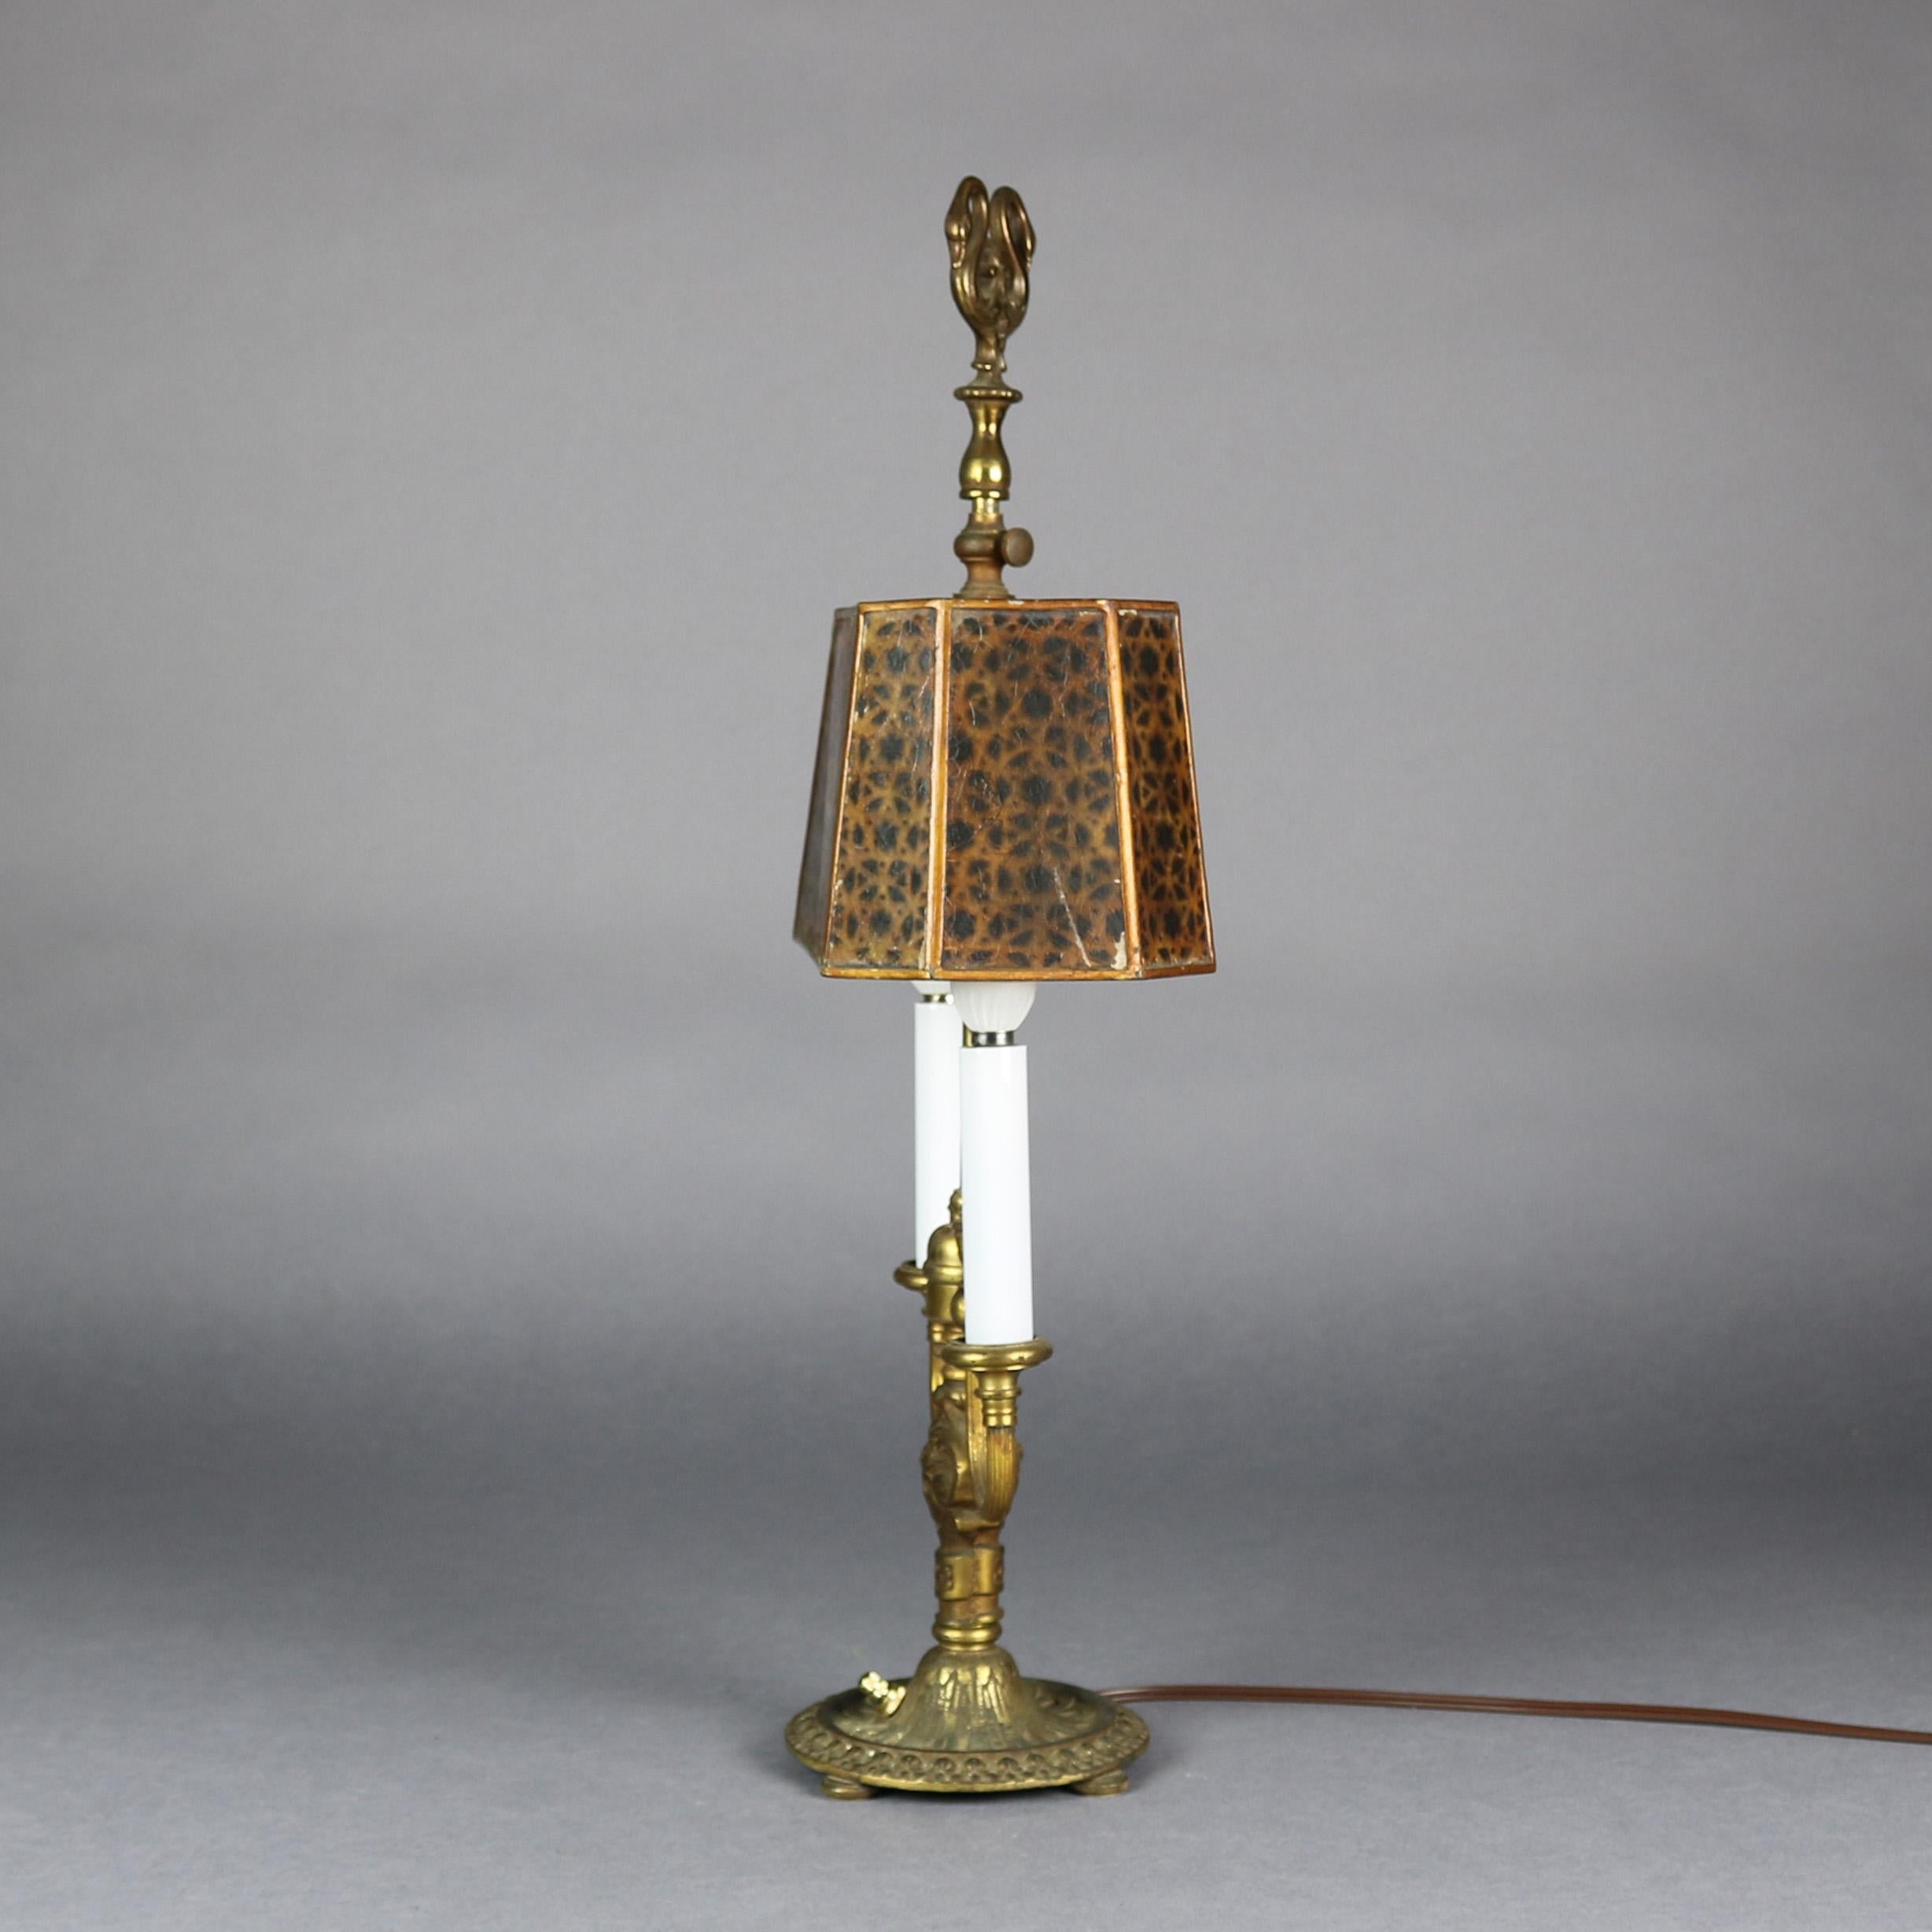 American Antique Rembrandt Bronze Bouillotte Table Lamp with Mica Shade, circa 1920